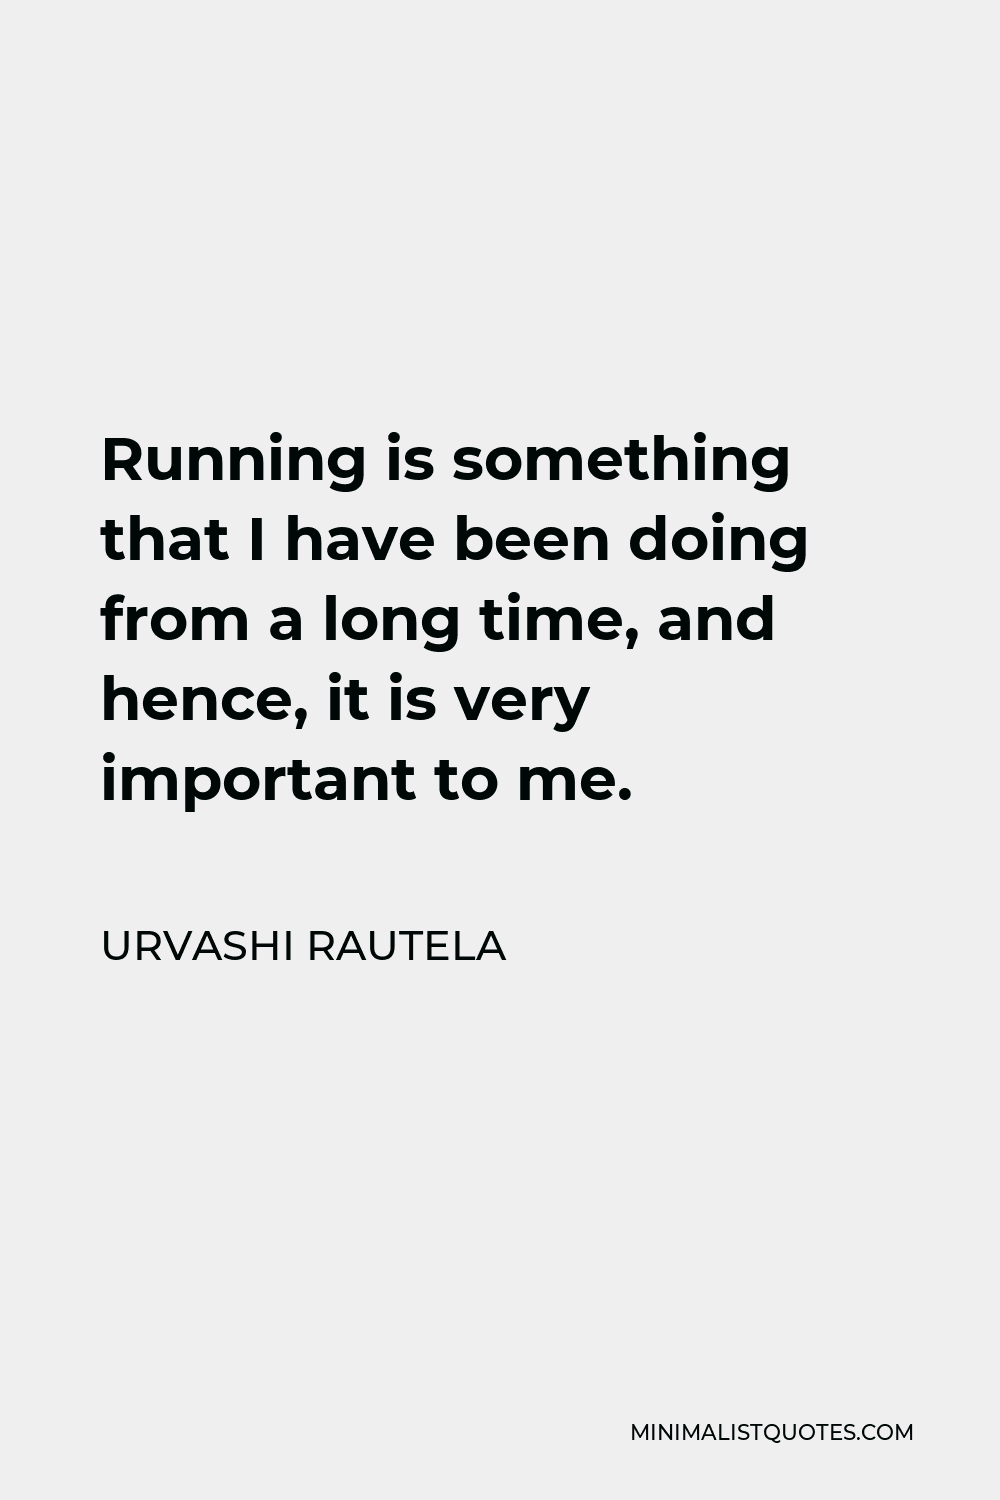 Urvashi Rautela Quote - Running is something that I have been doing from a long time, and hence, it is very important to me.